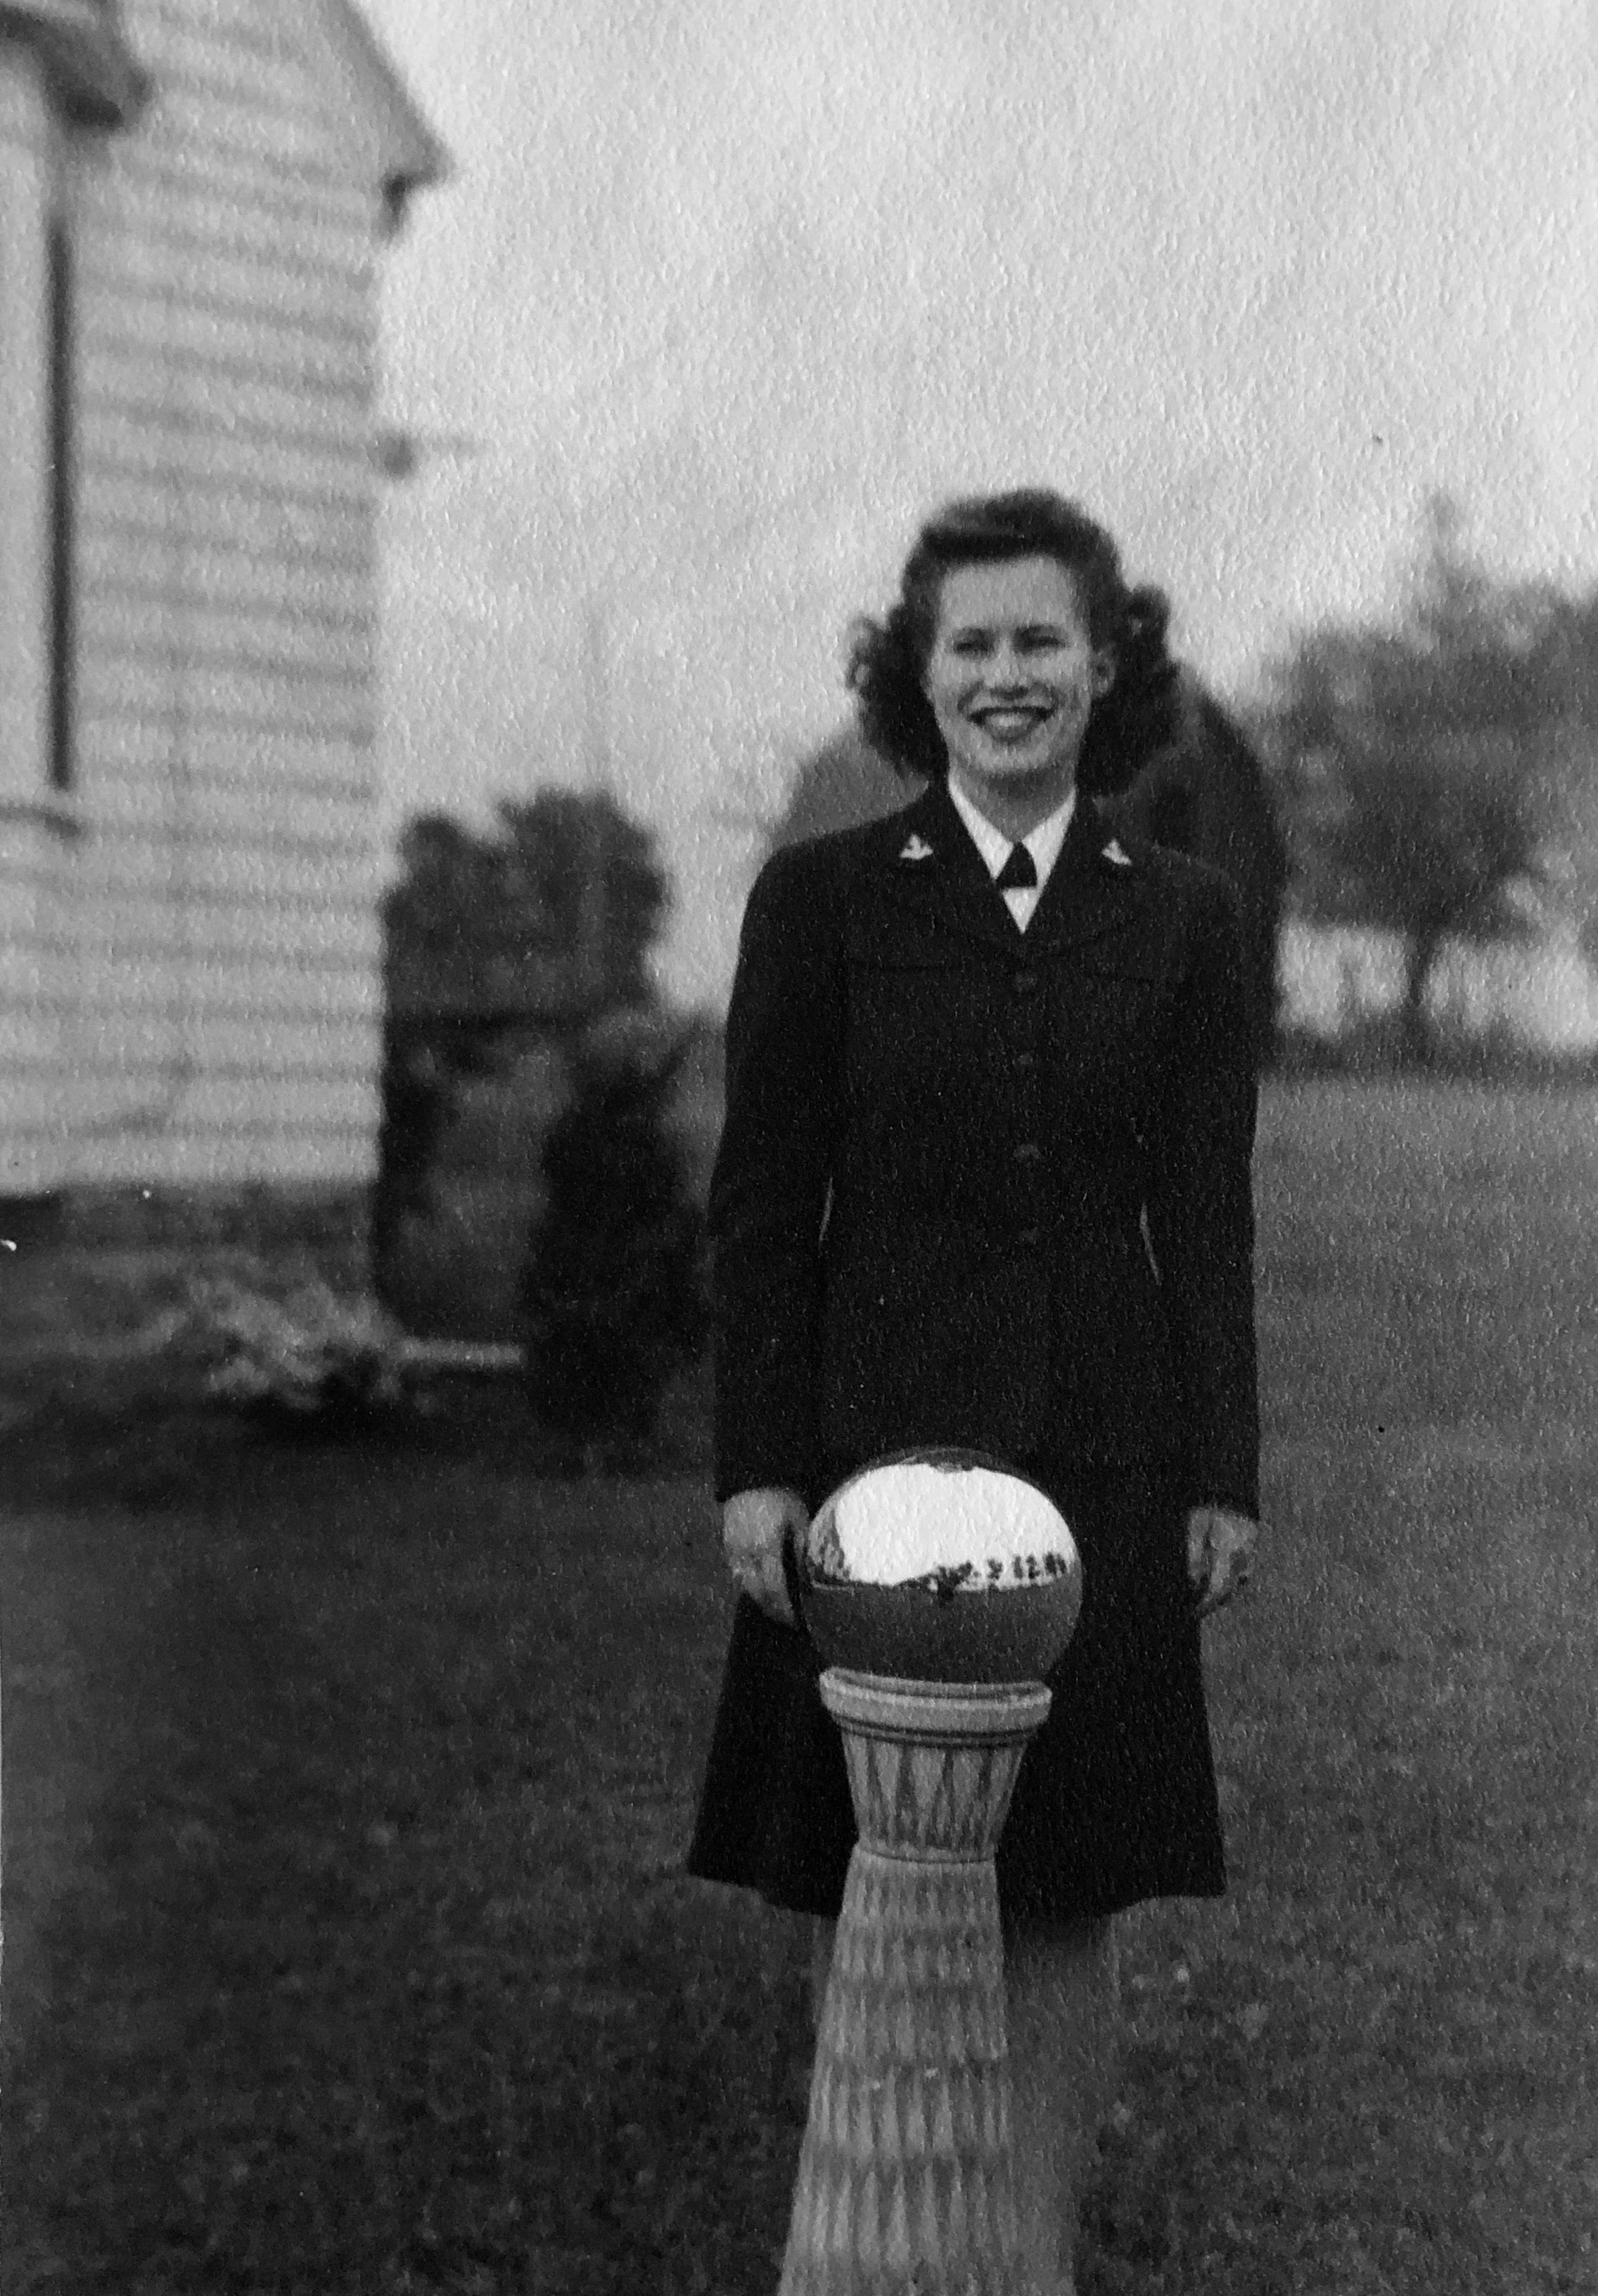 Home on leave about 1945